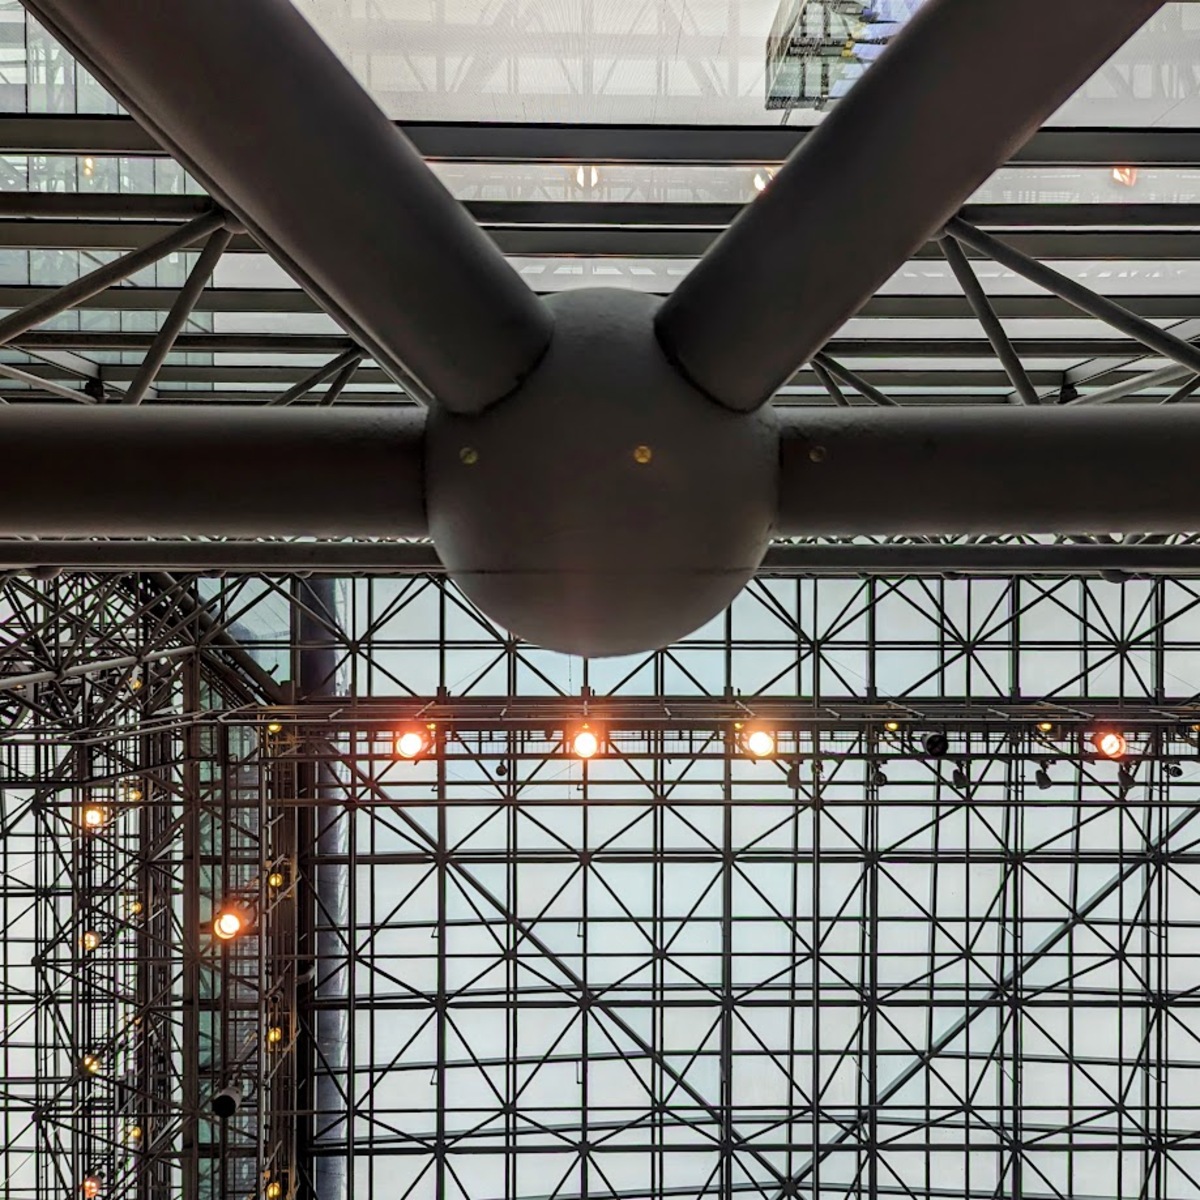 Steel beams, lights, and walkways in the Javitz Center in NYC.